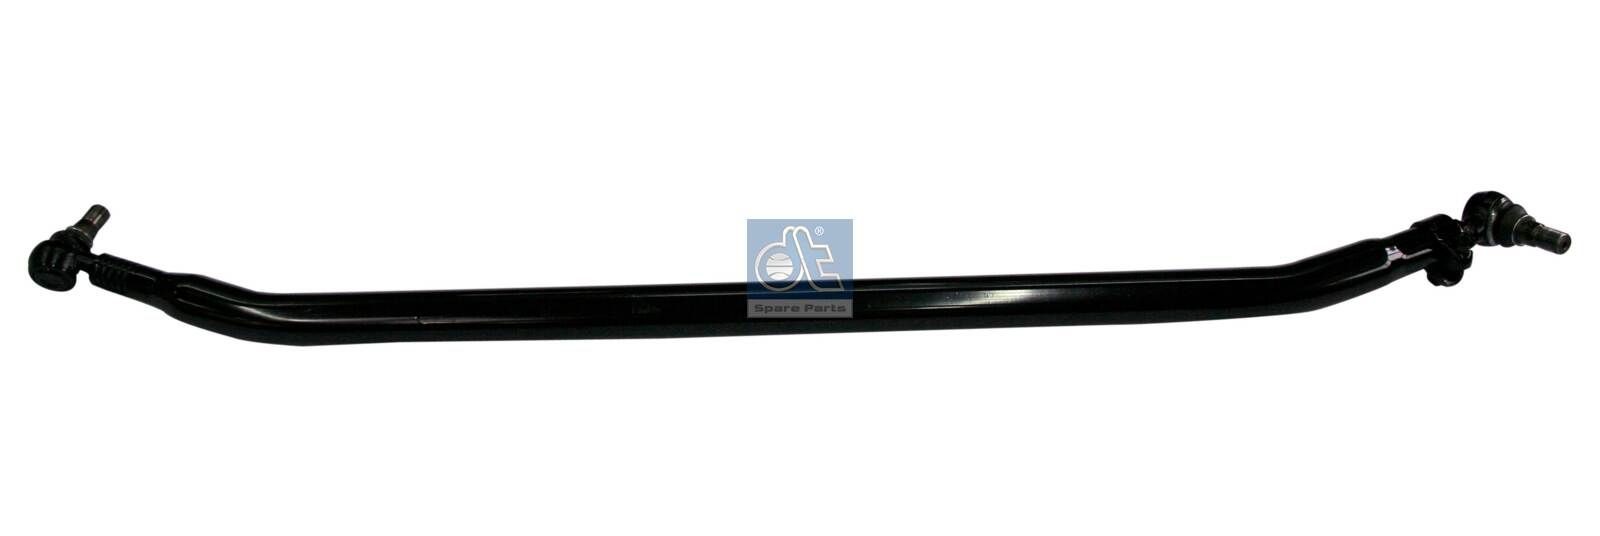 DT Spare Parts 4.62872 Rod Assembly 945 330 0003